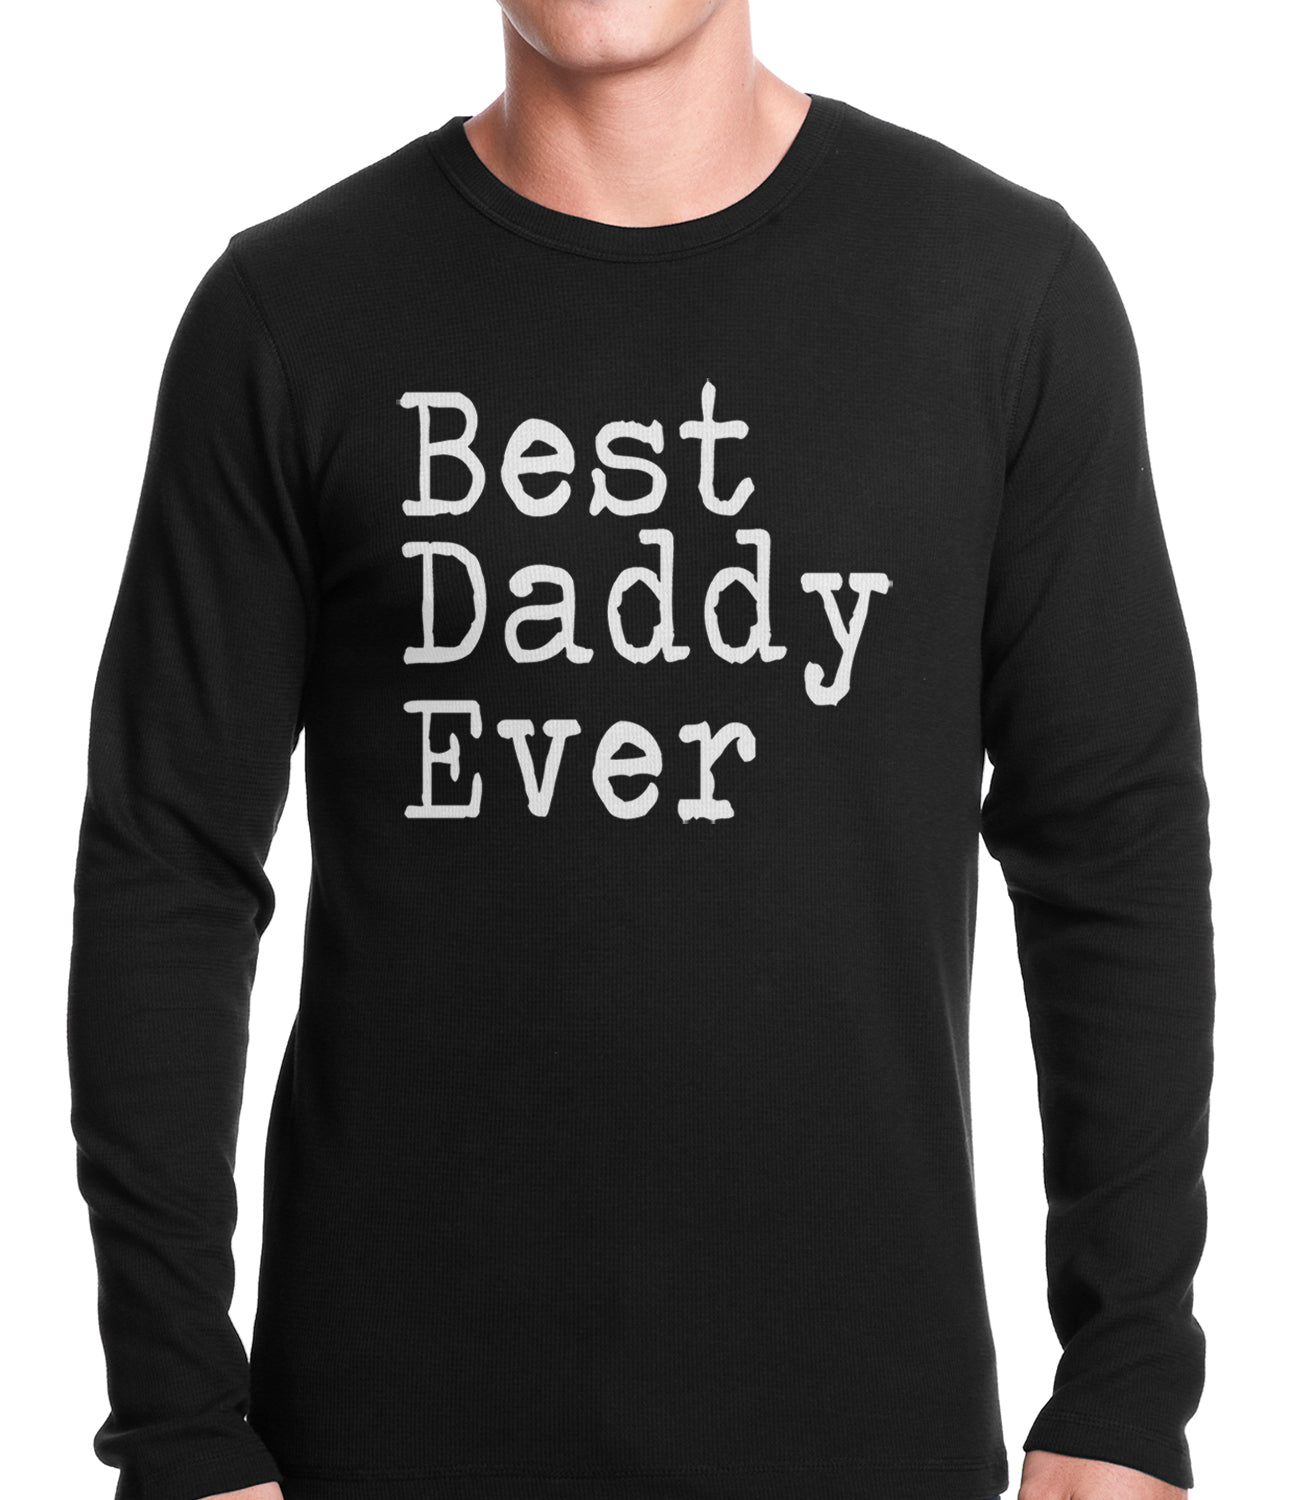 Best Daddy Ever Thermal Shirt